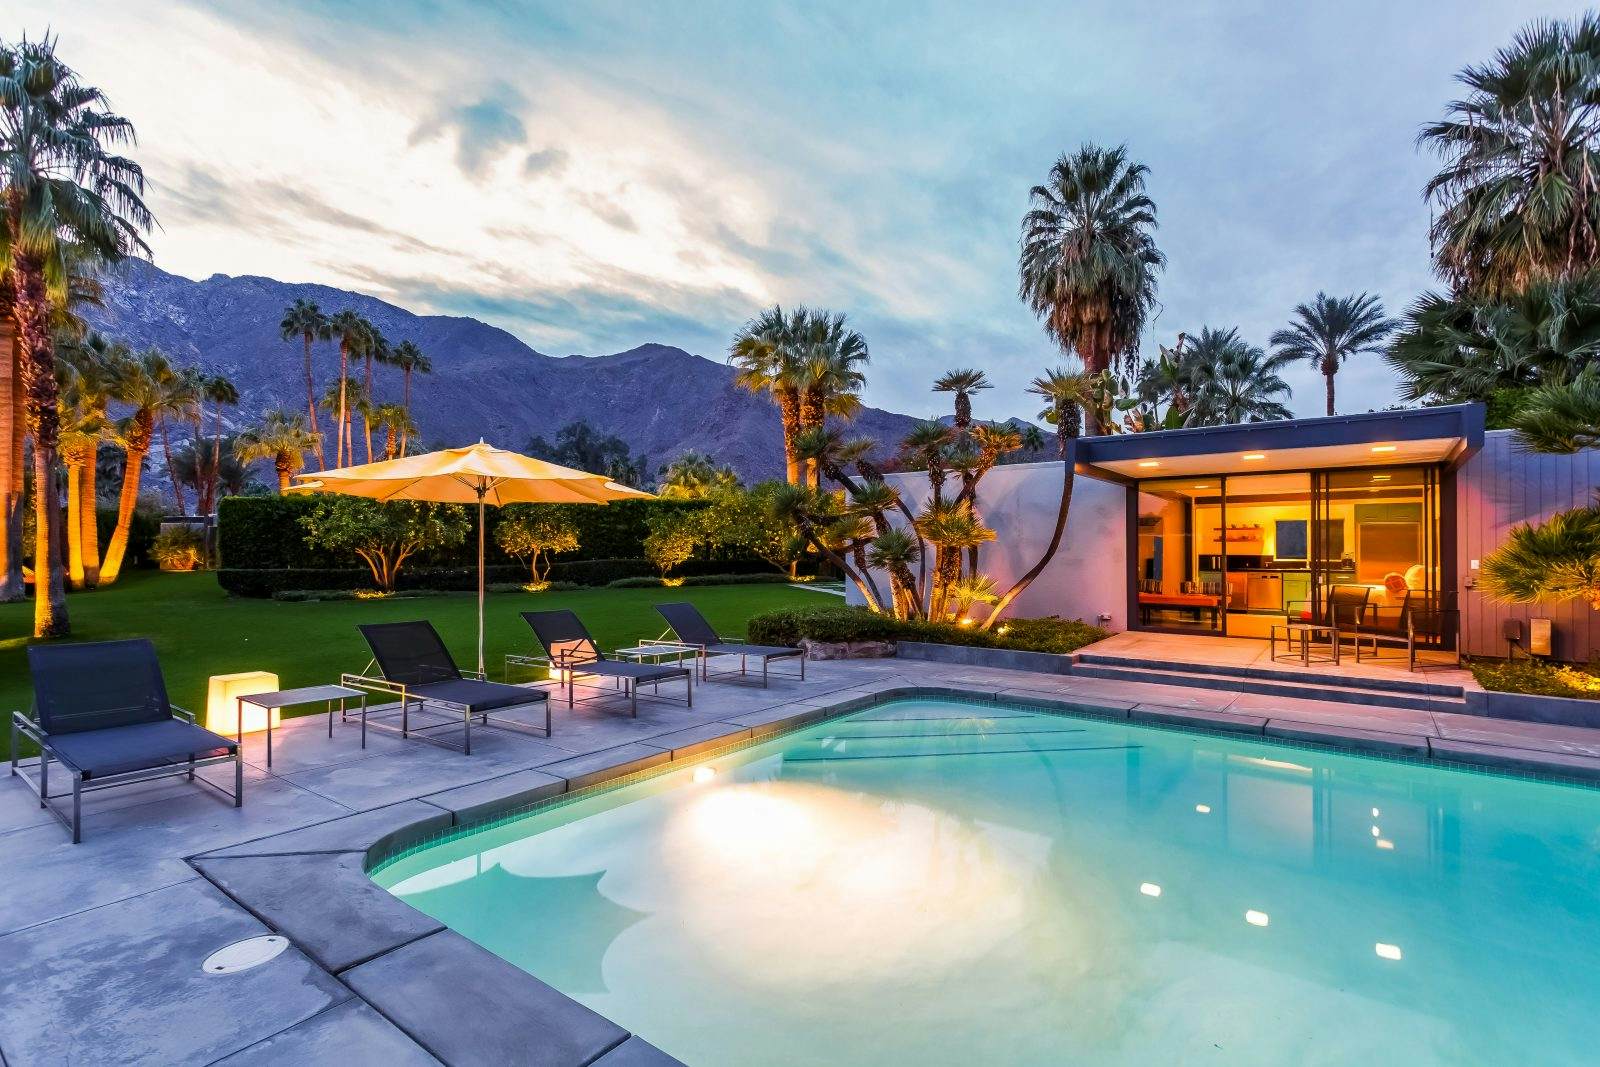 The modern womans getaway guide to Palm Springs image